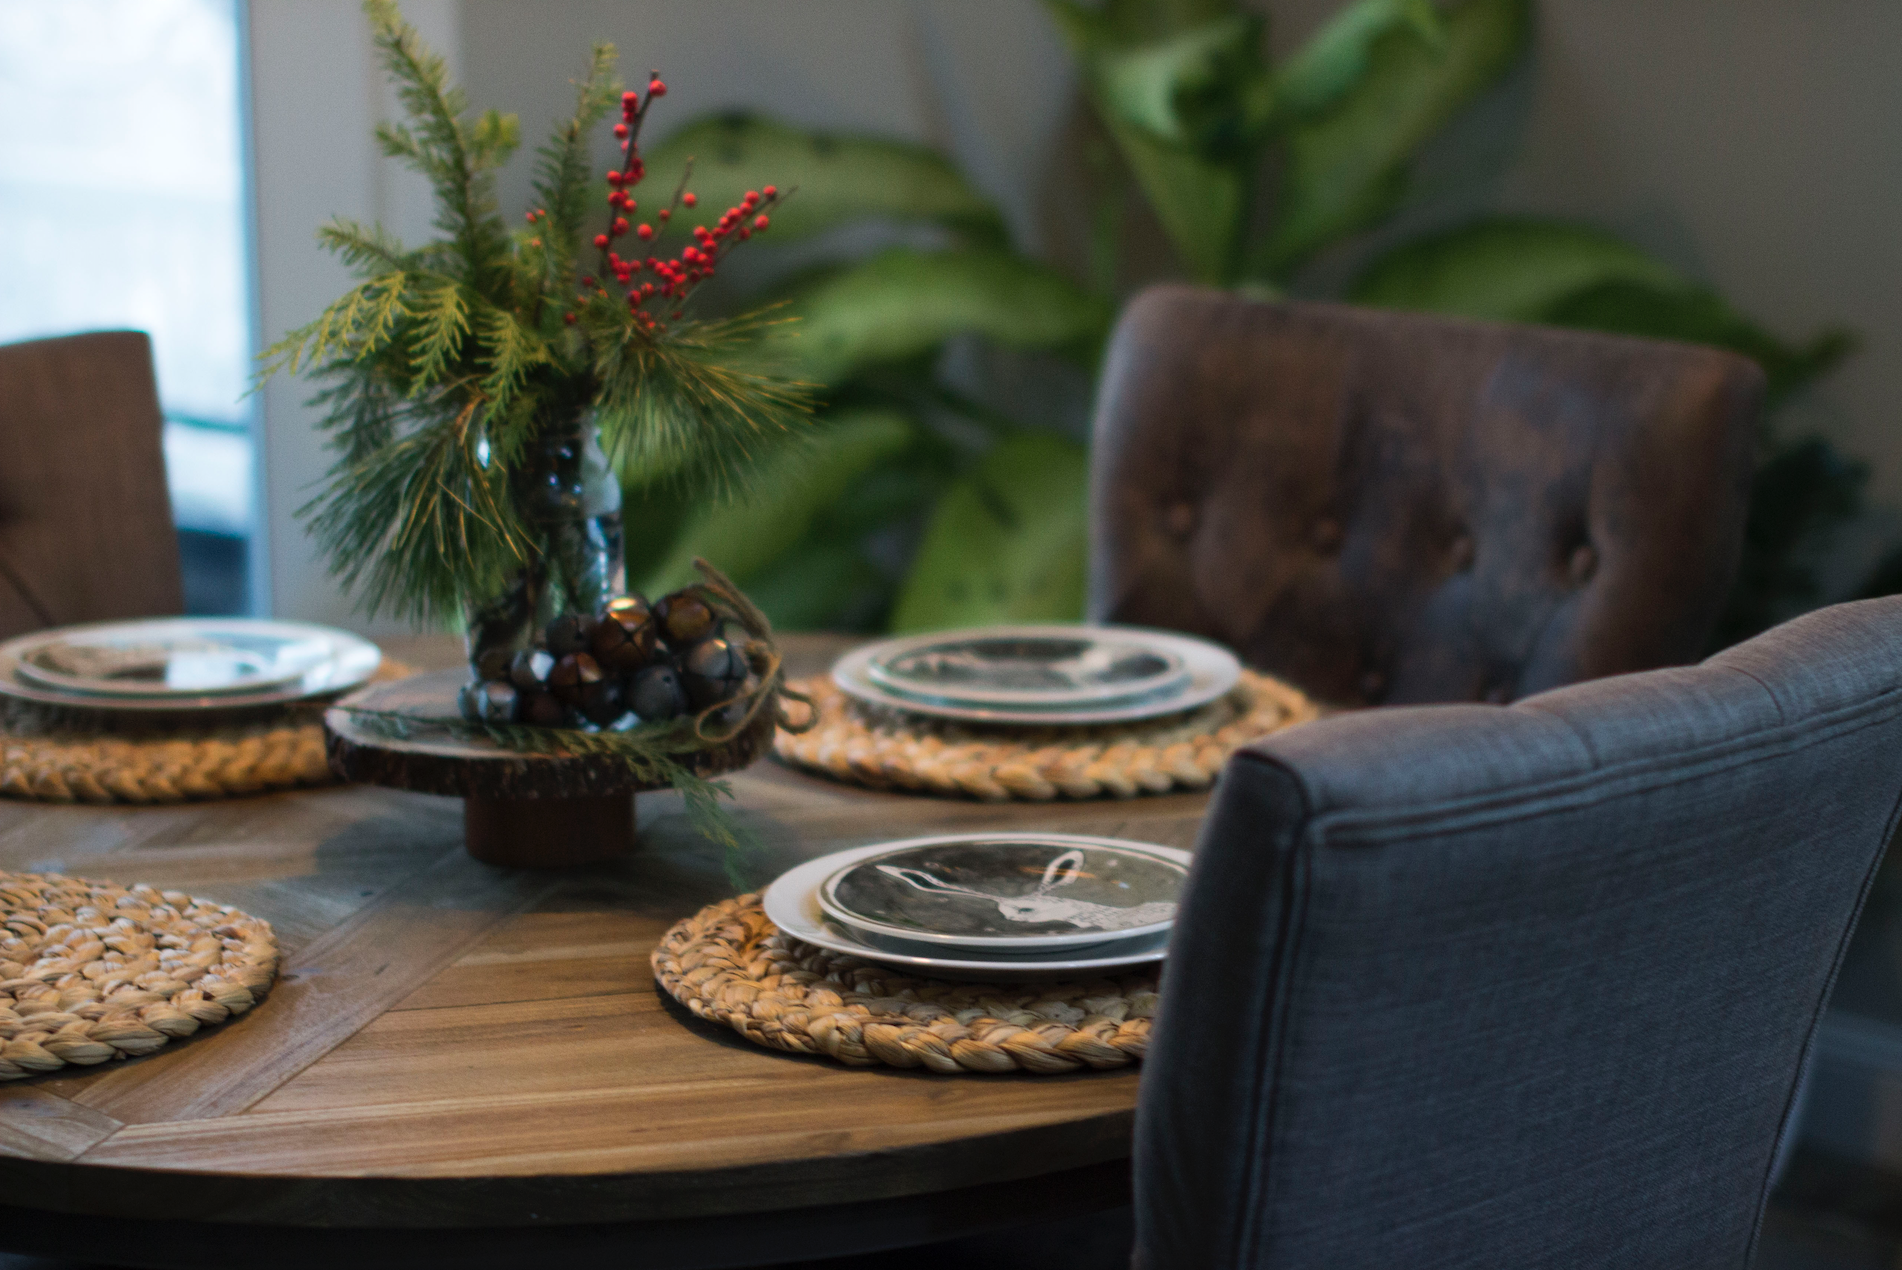 Rustic Christmas TableScape featuring animal plates on woven placemats.